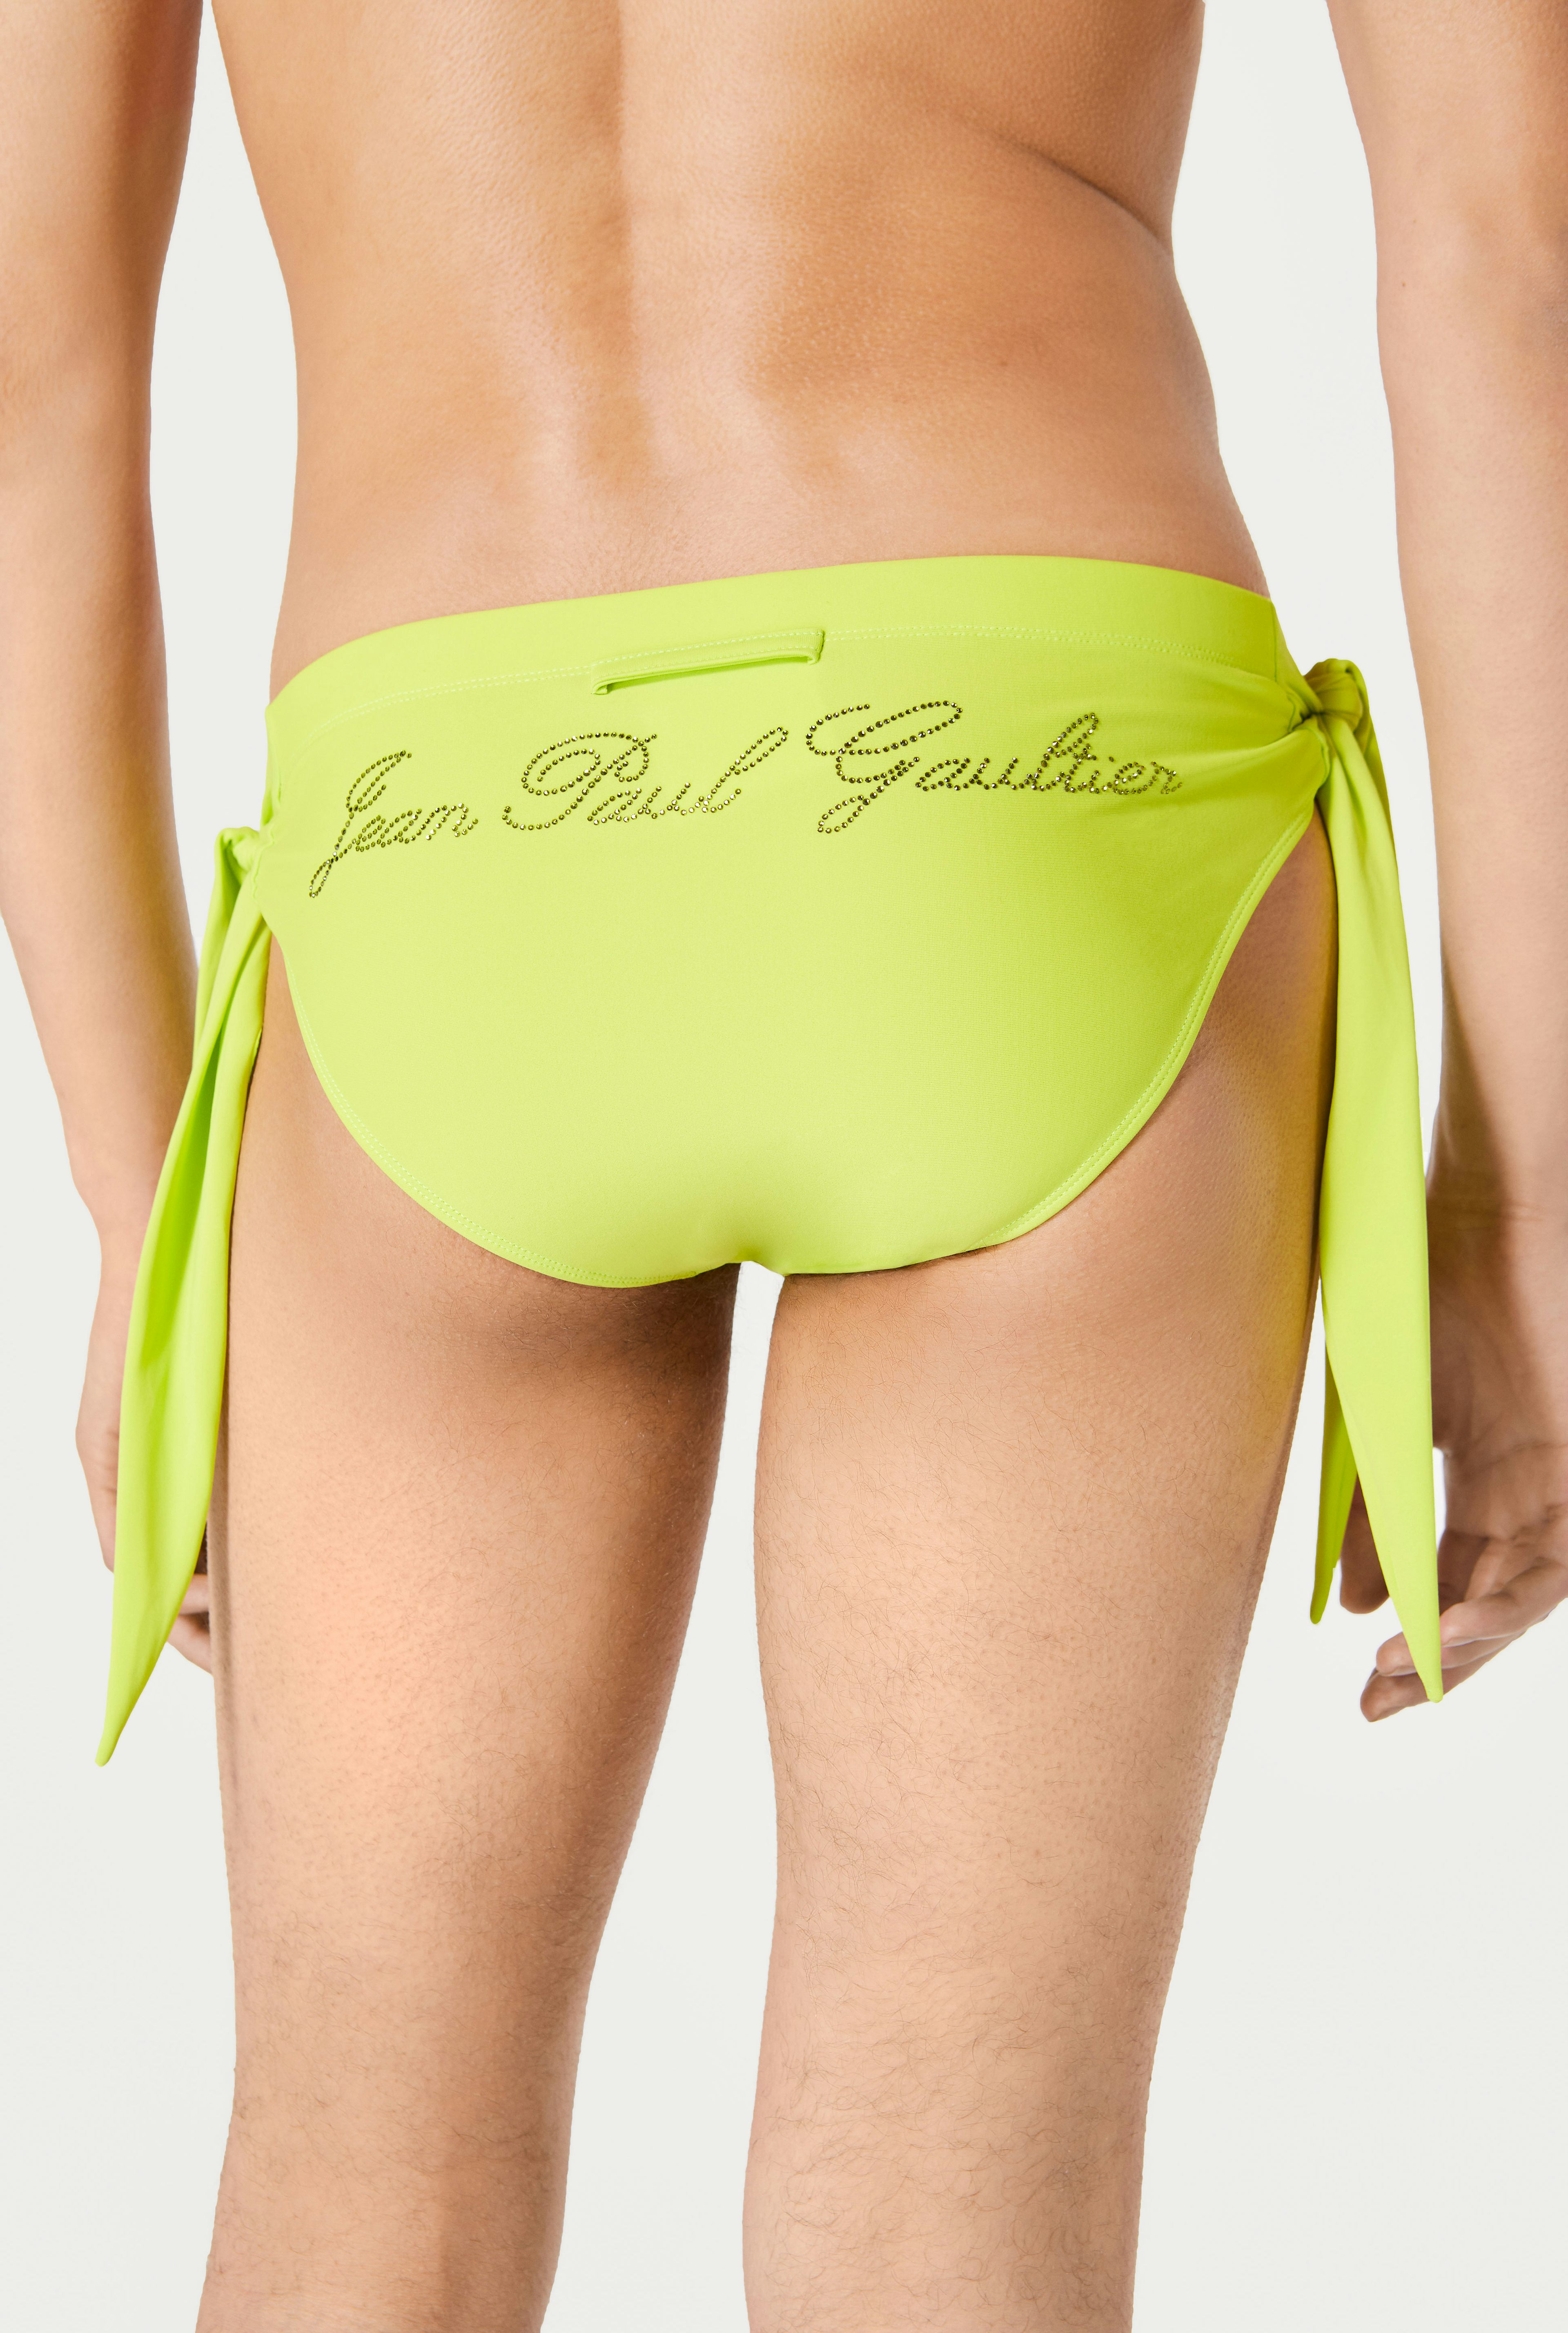 The Green Jean Paul Gaultier Swimming Briefs hover